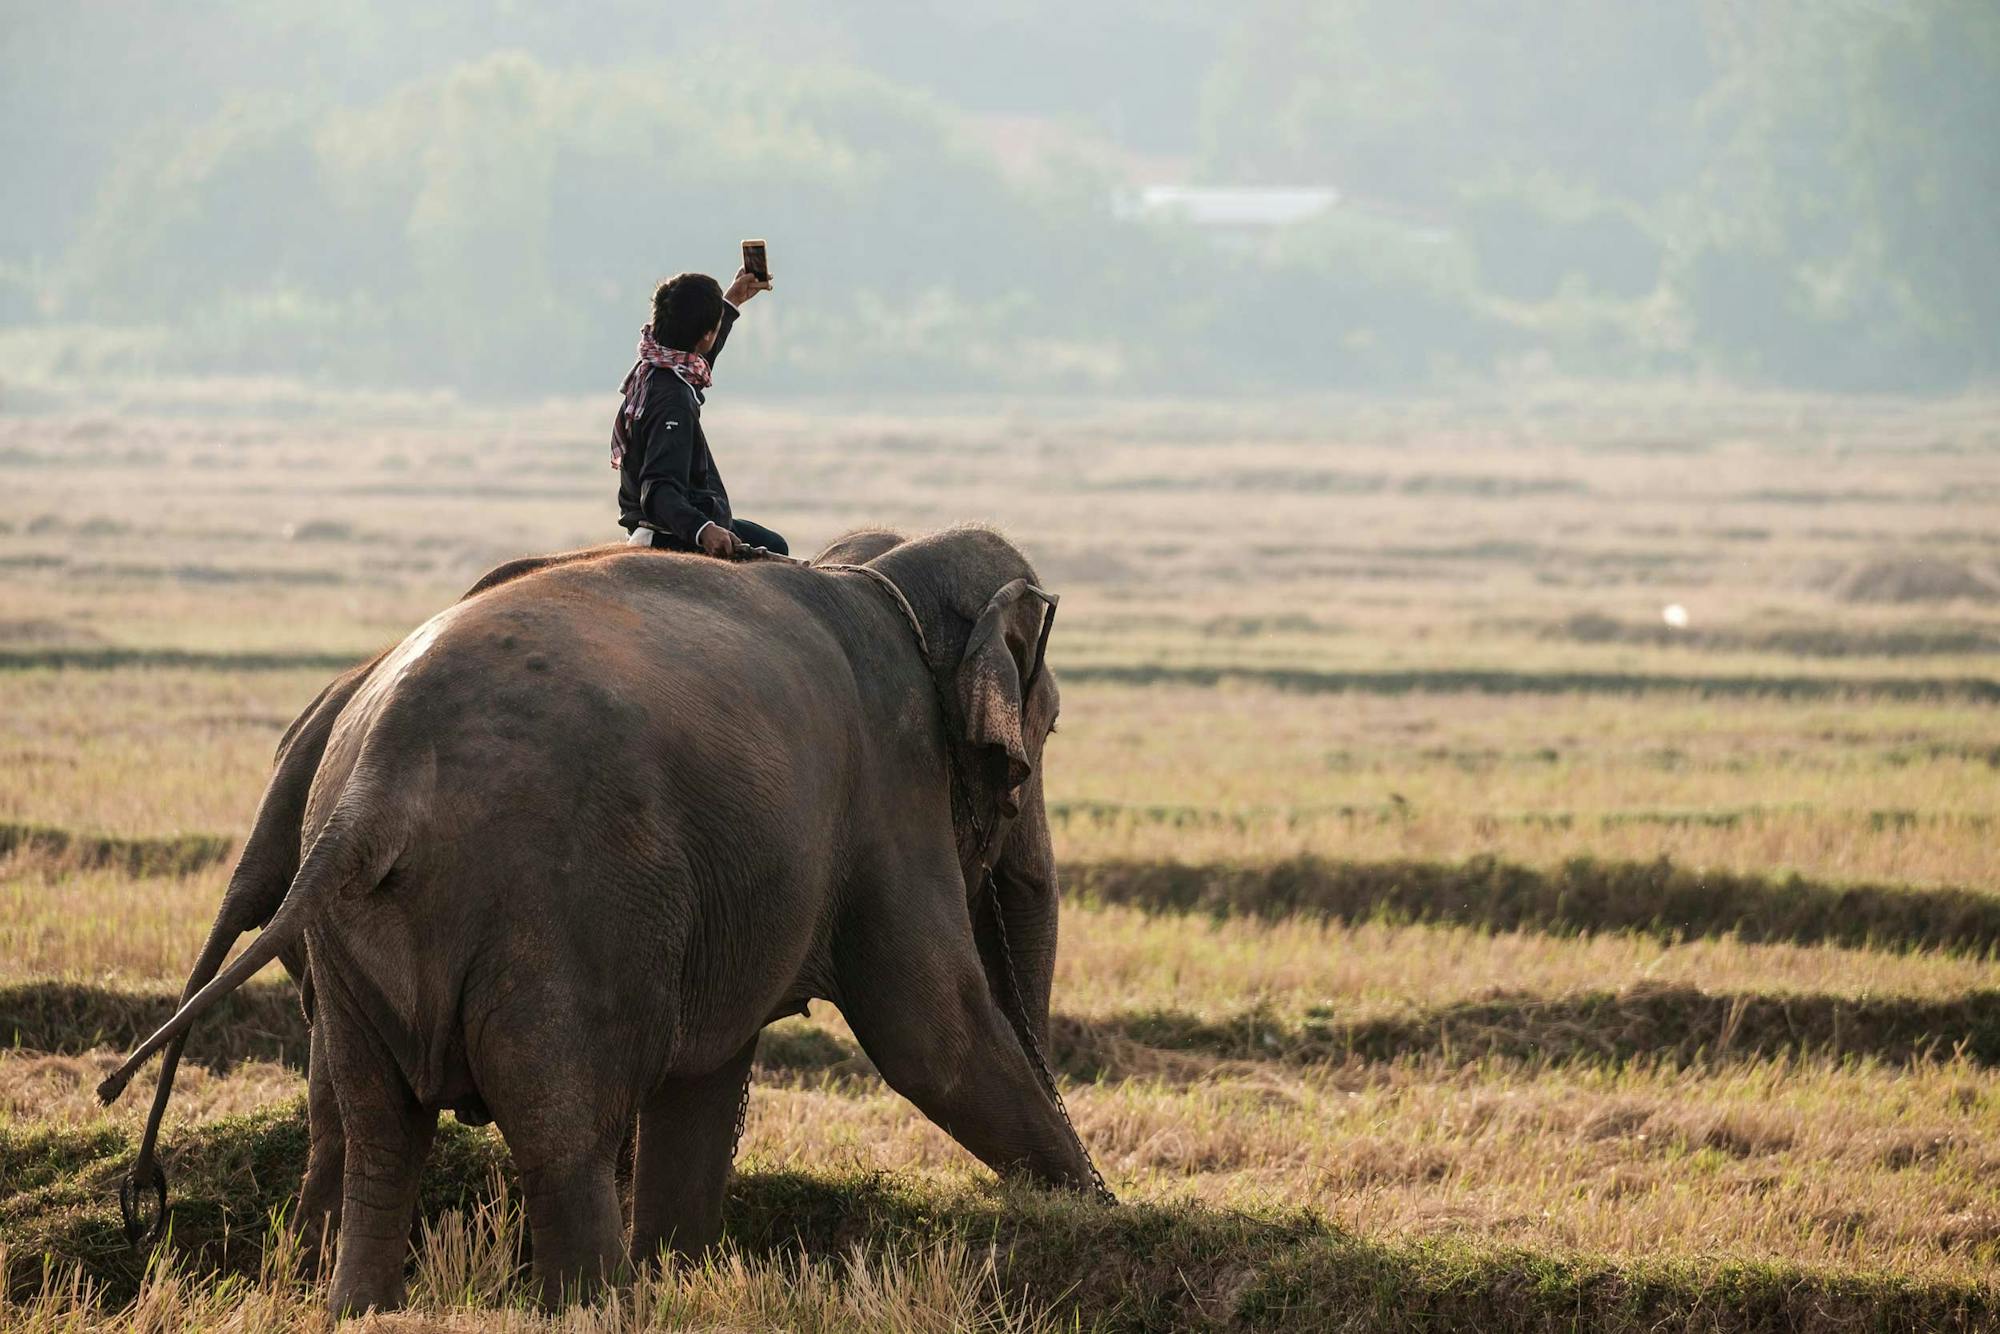 A man sat on top of a chained elephant taking a selfie on his mobile phone